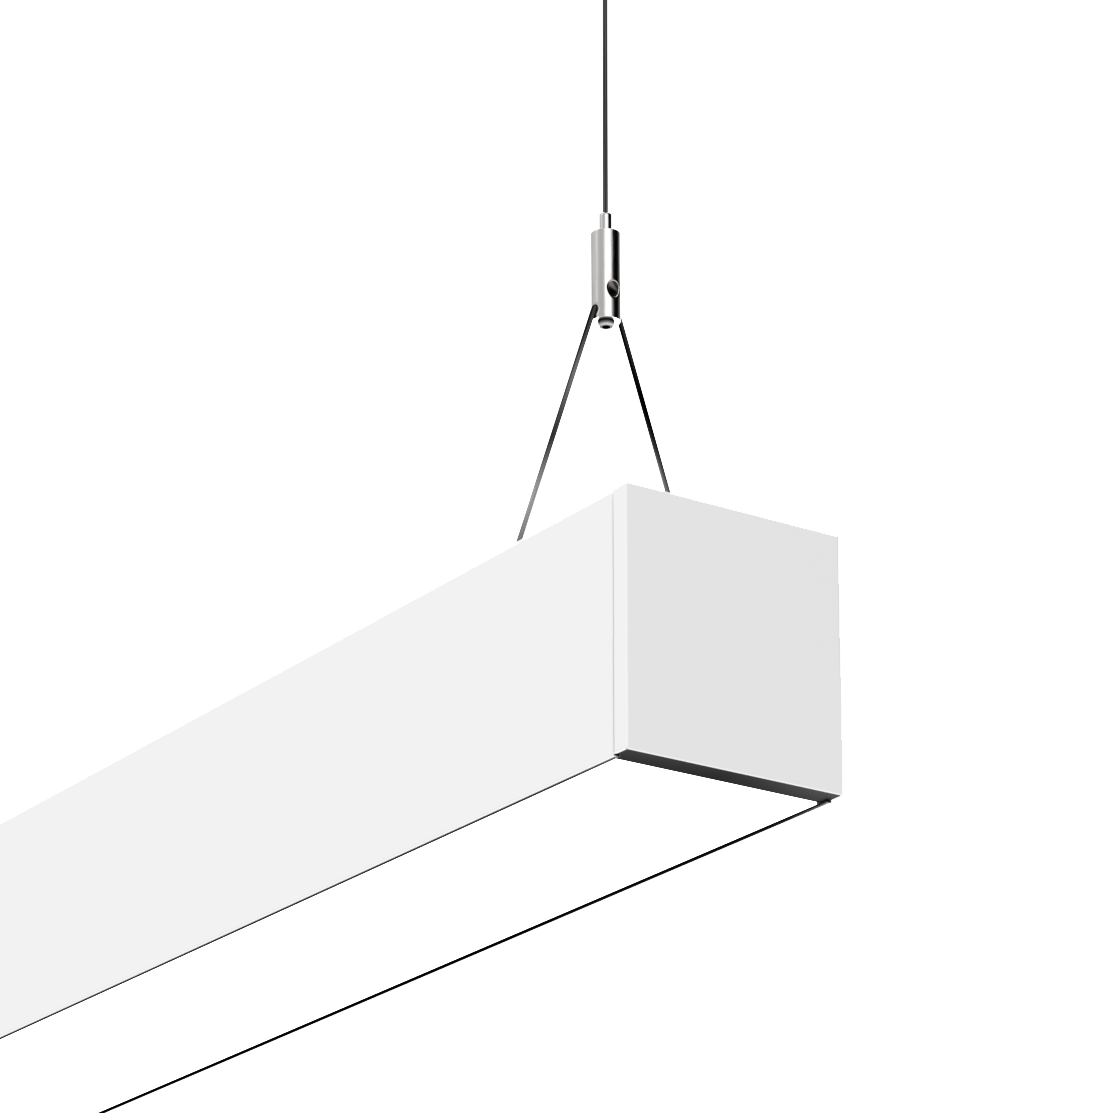 PROSquare3 pendant brings SmartBeam® capabilities to a 3” form factor with an integral driver providing best-in-class efficiency and beam control options. The PROSquare3 pendant is designed to be specification grade with a wide range of beam options, high CRI, and circadian options. The 3